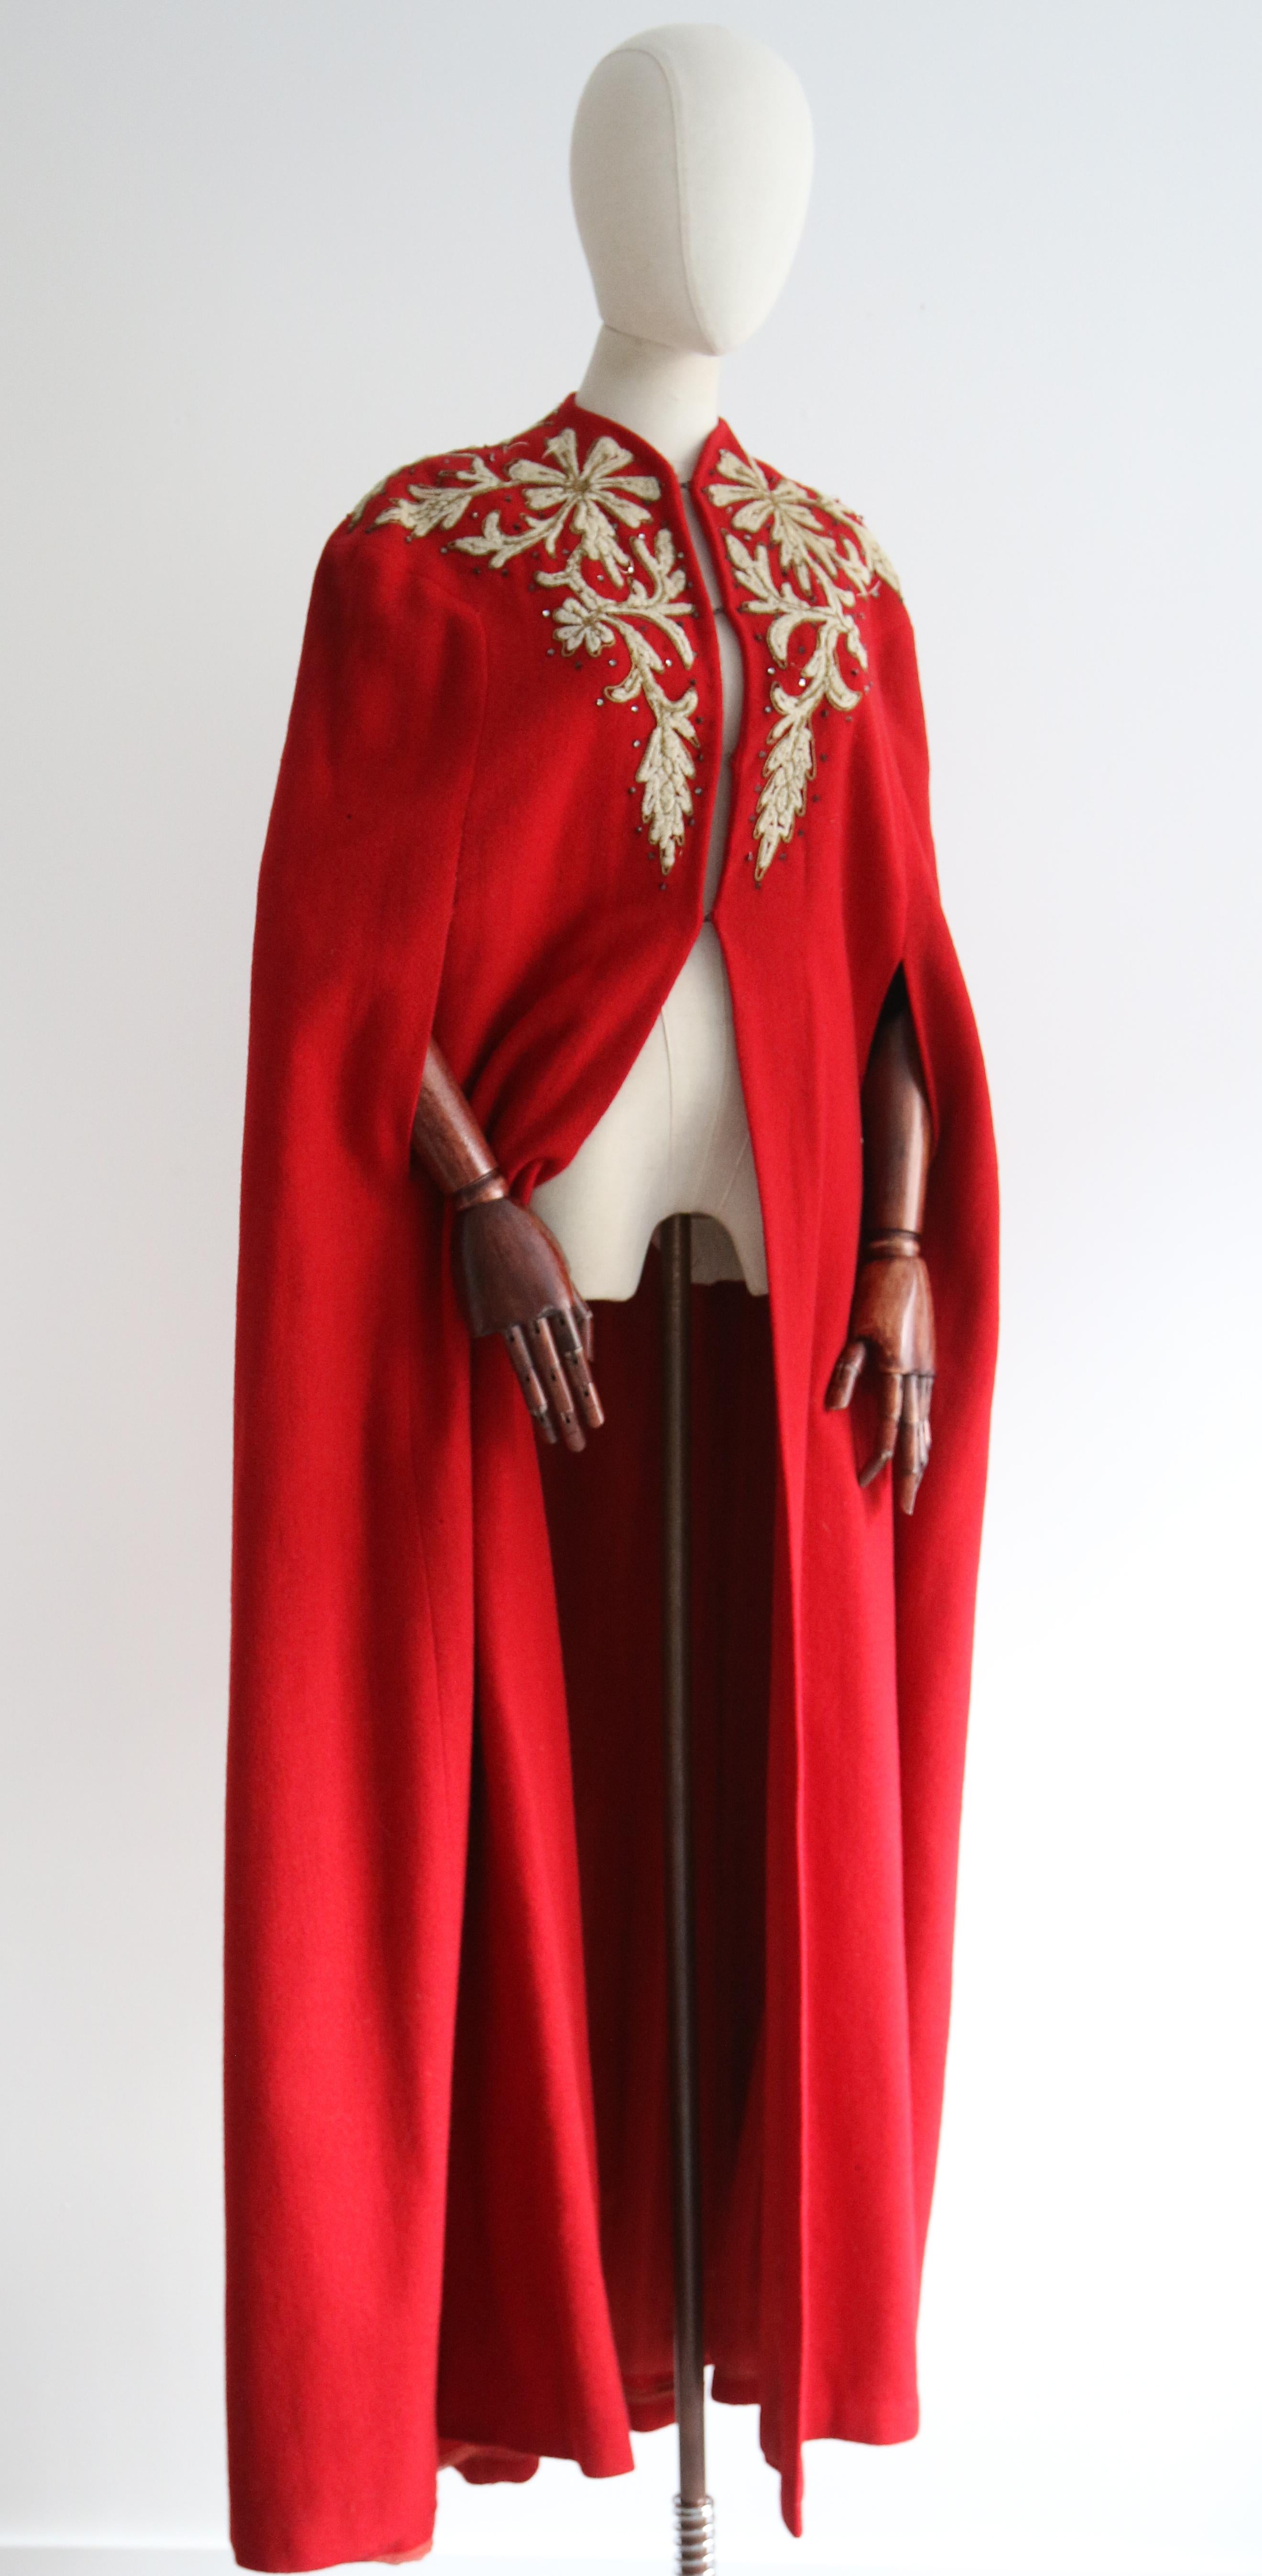 Vintage Early 1940's Red Wool Embroidered Cape UK 10-16 US 6-12 For Sale 1